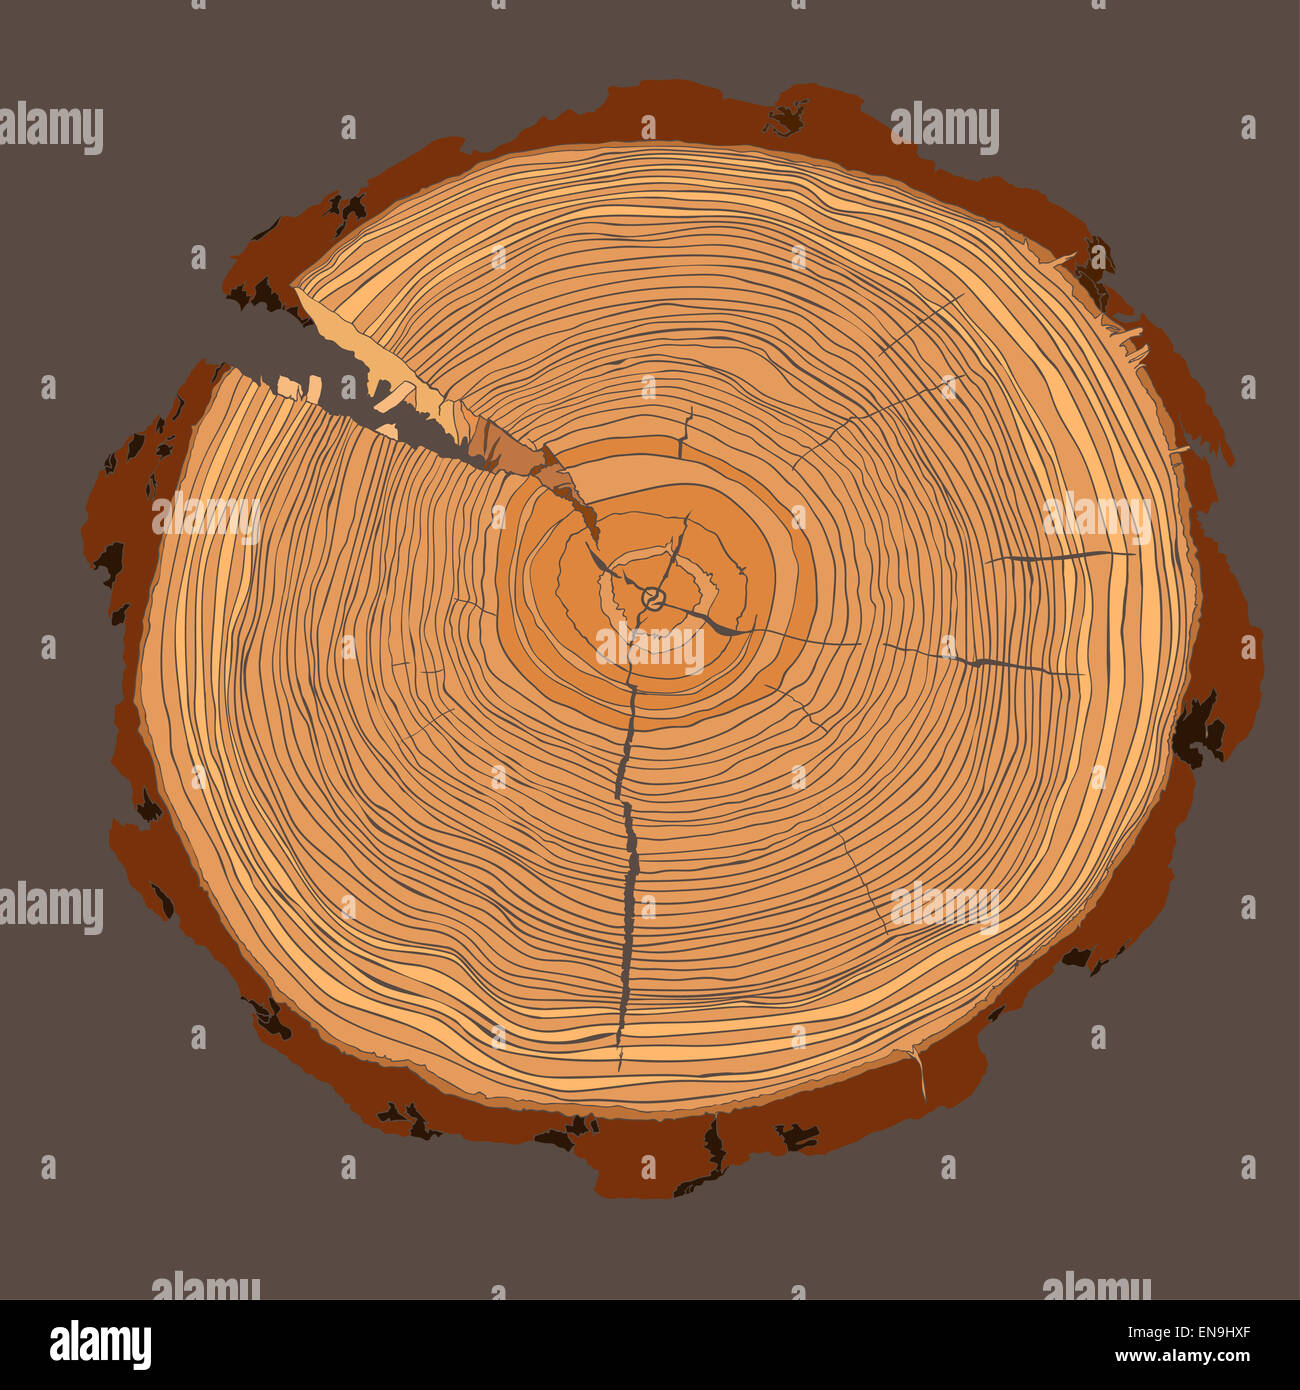 Annual tree growth rings with brown tonesdrawing of the cross-section of a tree trunk. Vector illusration Stock Photo